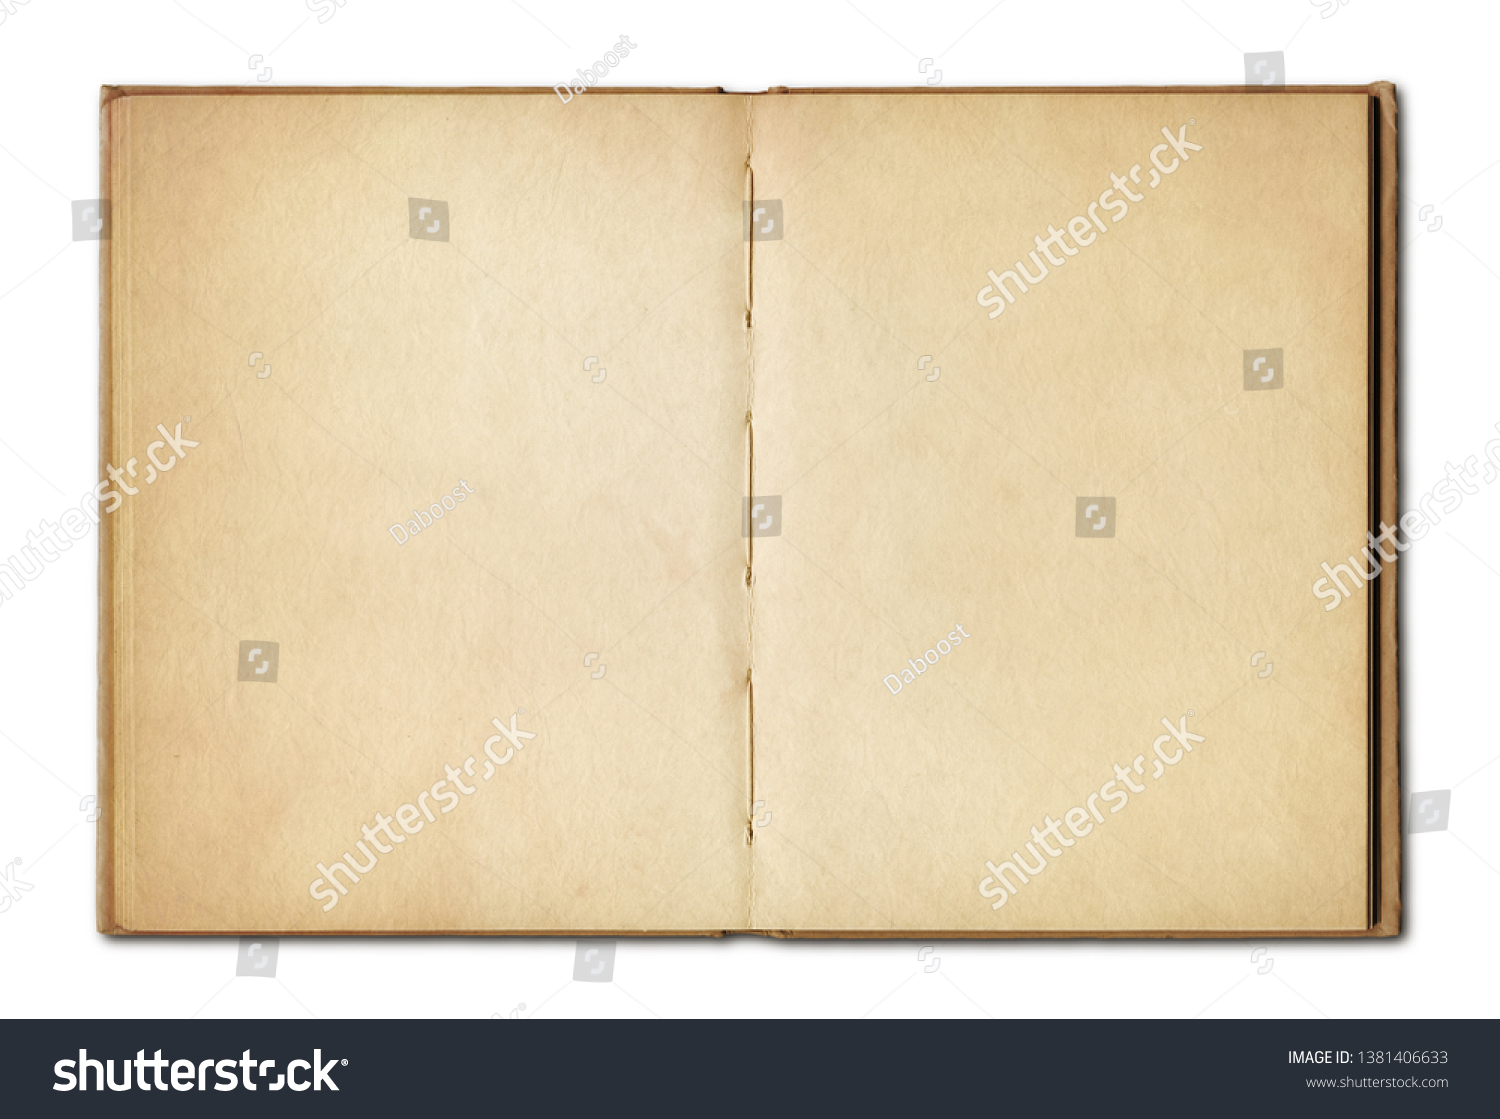 Old vintage open book isolated on white background #1381406633